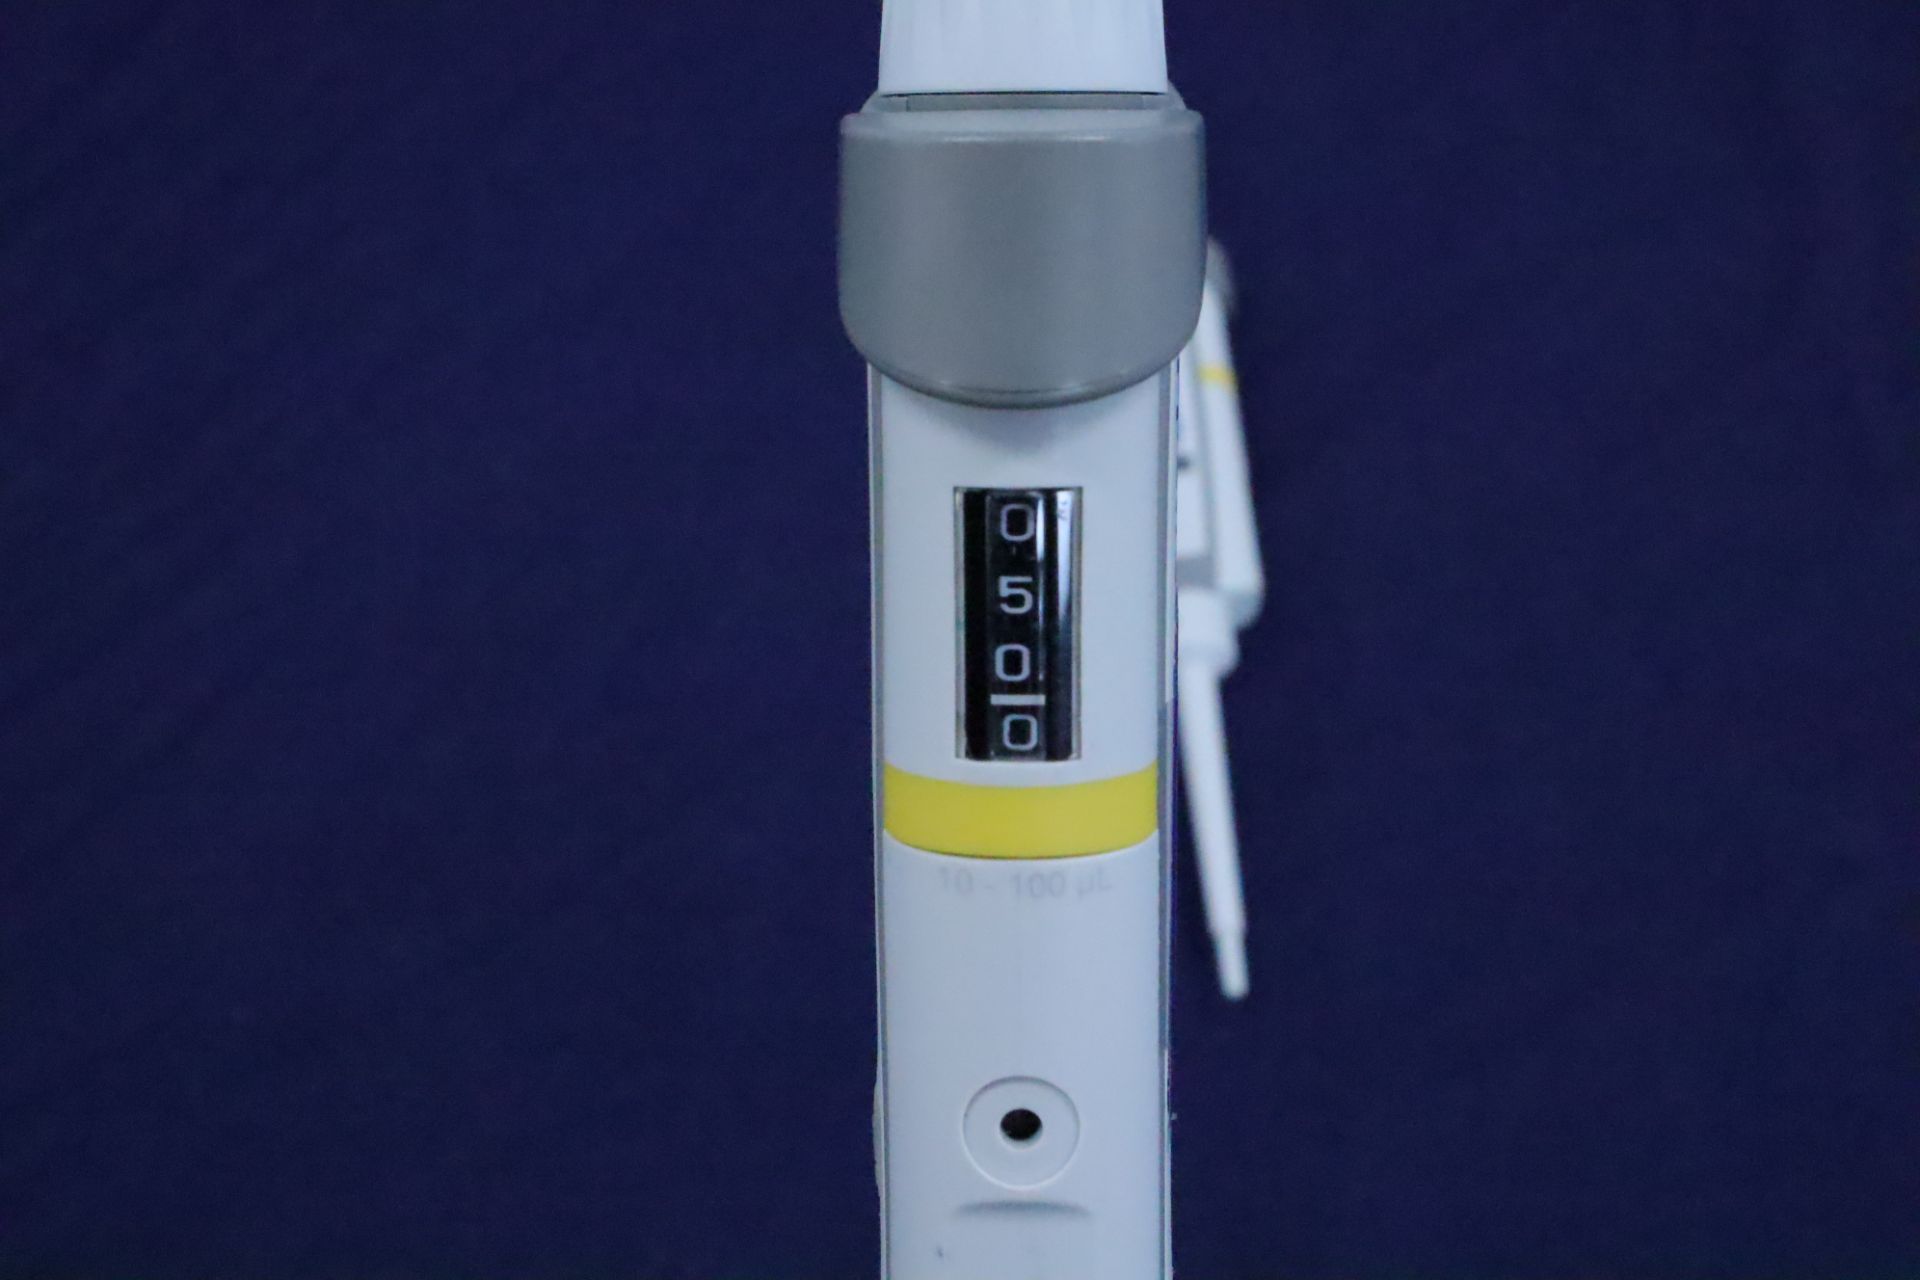 Eppendorf Research Plus Adjustable Volume Pipette 2-20 uL & 10-100 uL - Image 3 of 8